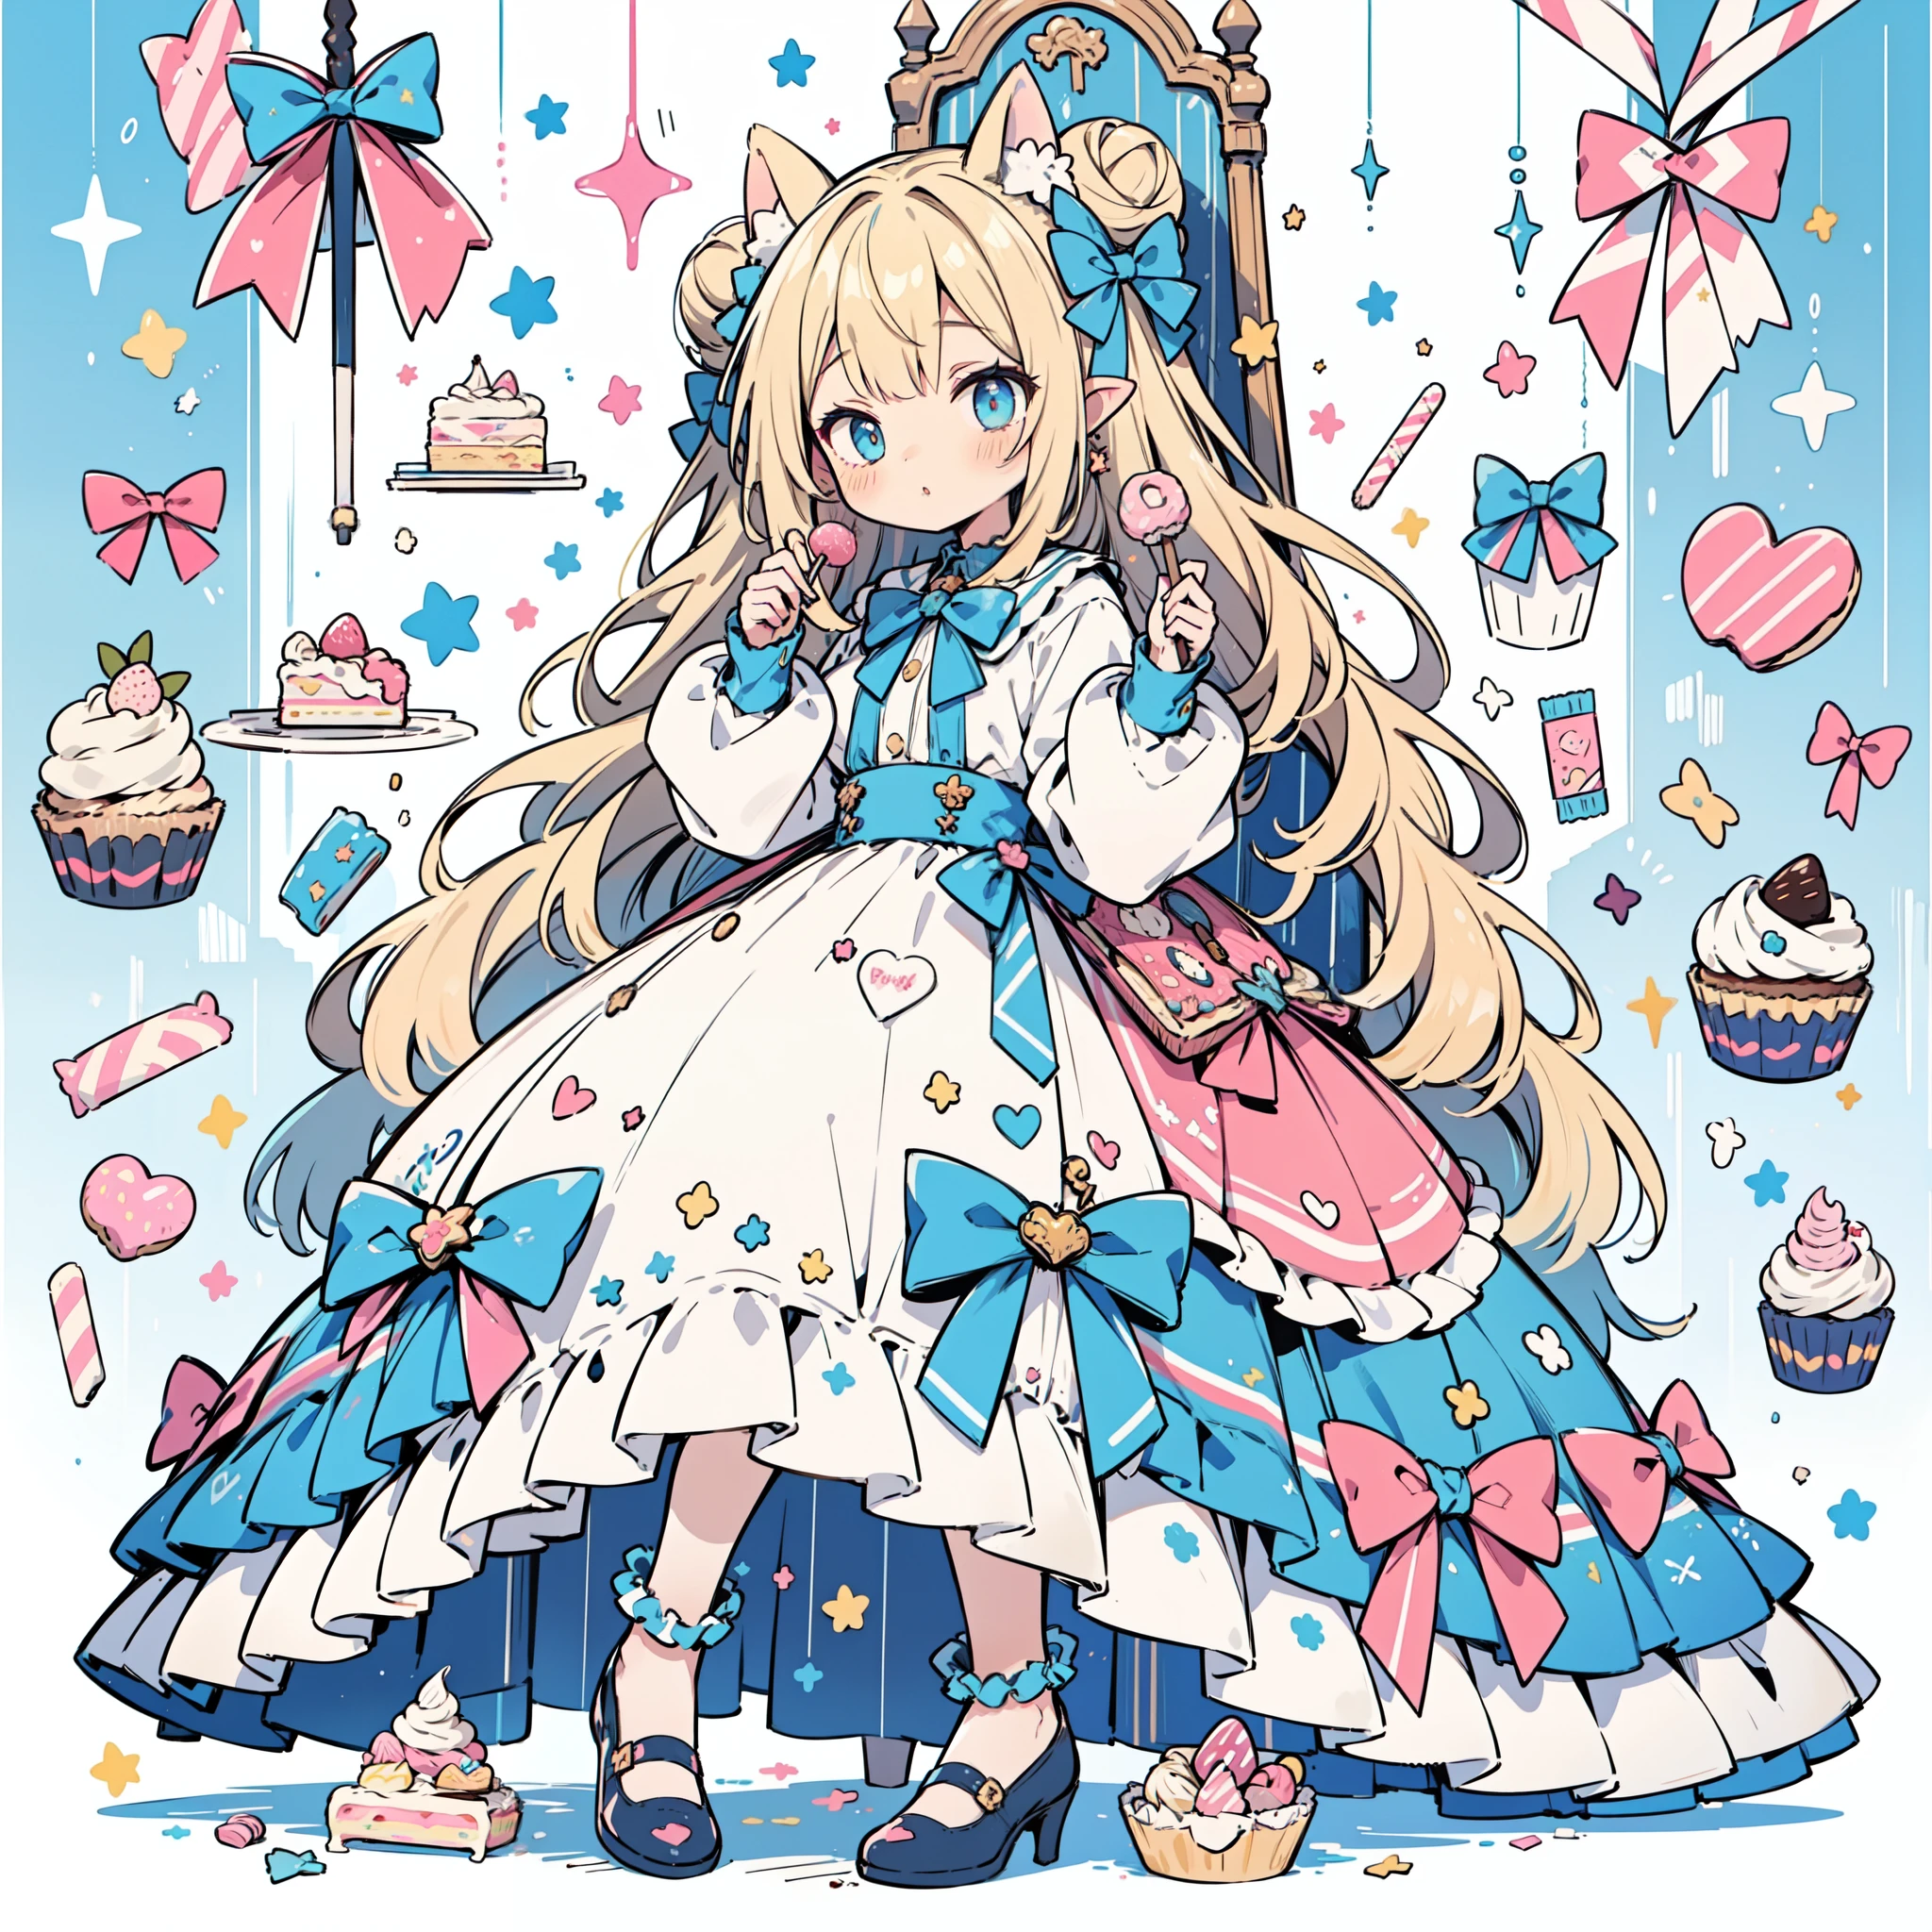 1girl, pastel muted colors, (color palette is yellow:1.2, blue:1.2, pink:1.2), (blonde with blue hair buns), short fashion skirt, sitted in a throne made out of sweets and pastries, for example donuts, sprinkles, candy, lollipops, candycane, cake, cupcakes, cakepops, frills and lace, polka dot patterns, long bat ears